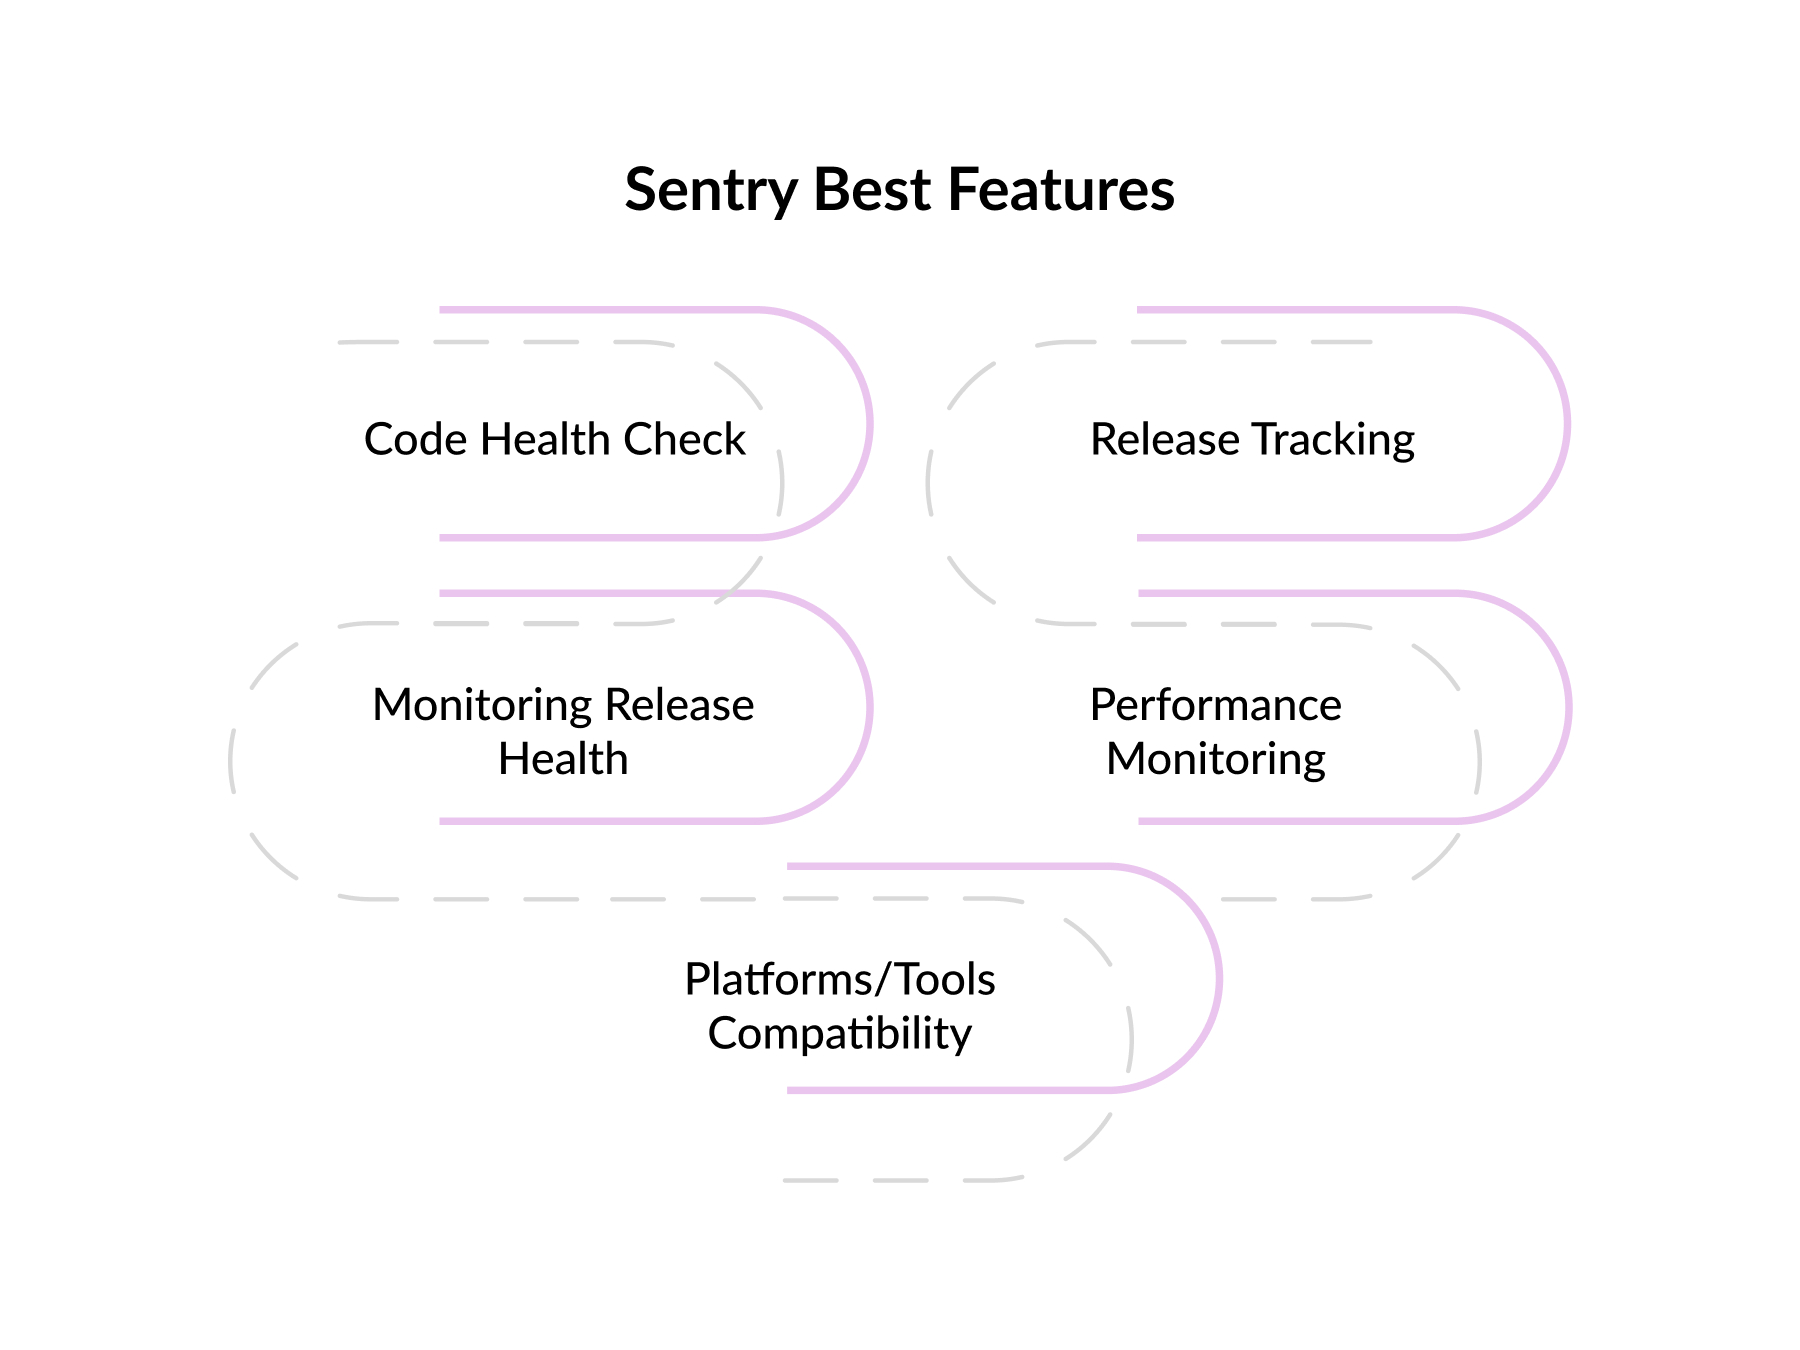 Sentry Best Features